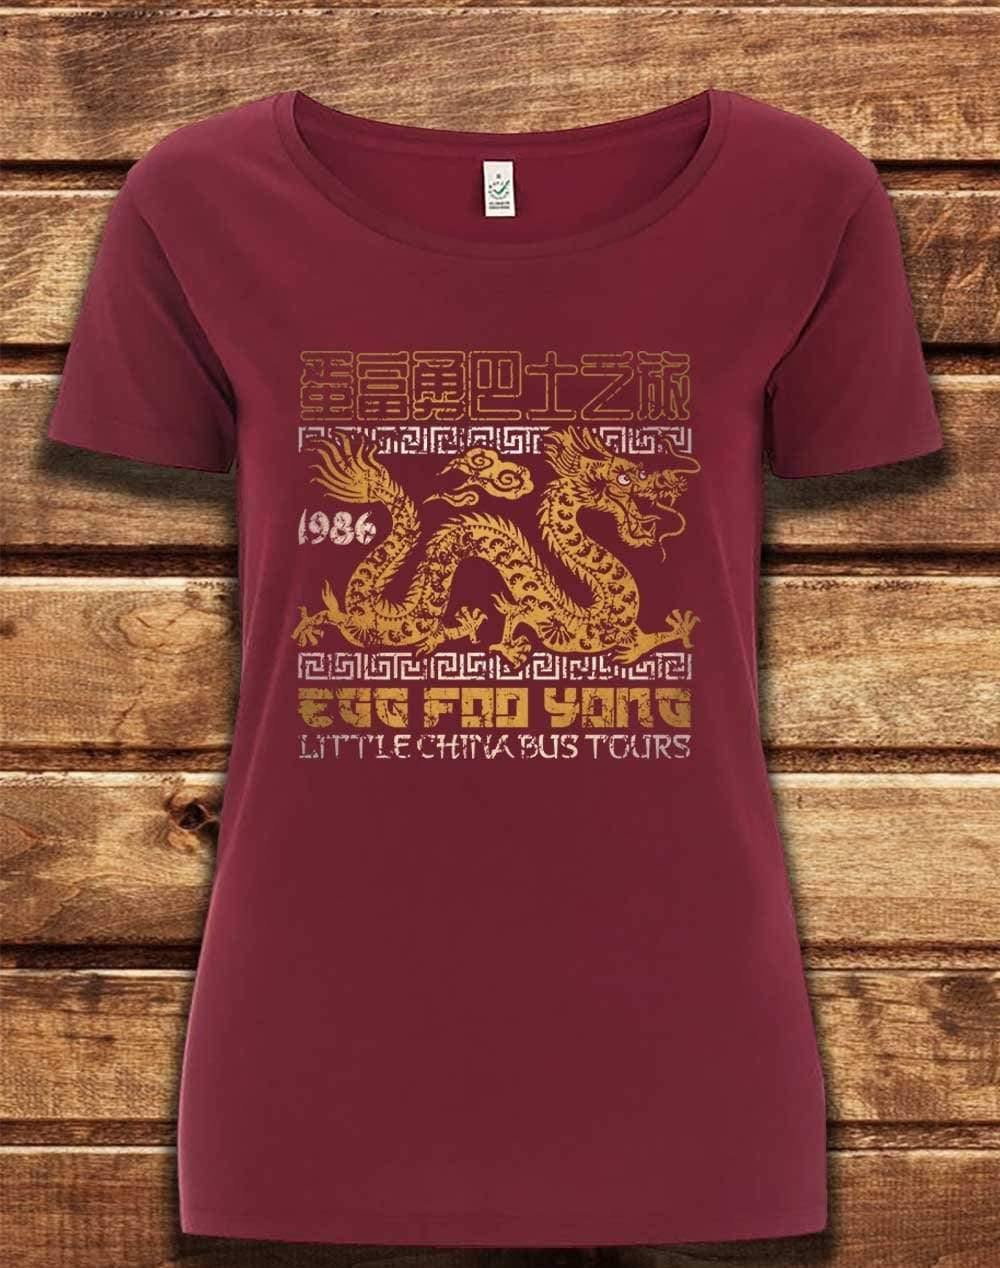 DELUXE Egg Foo Yong Bus Tours Organic Scoop Neck T-Shirt 8-10 / Burgundy  - Off World Tees